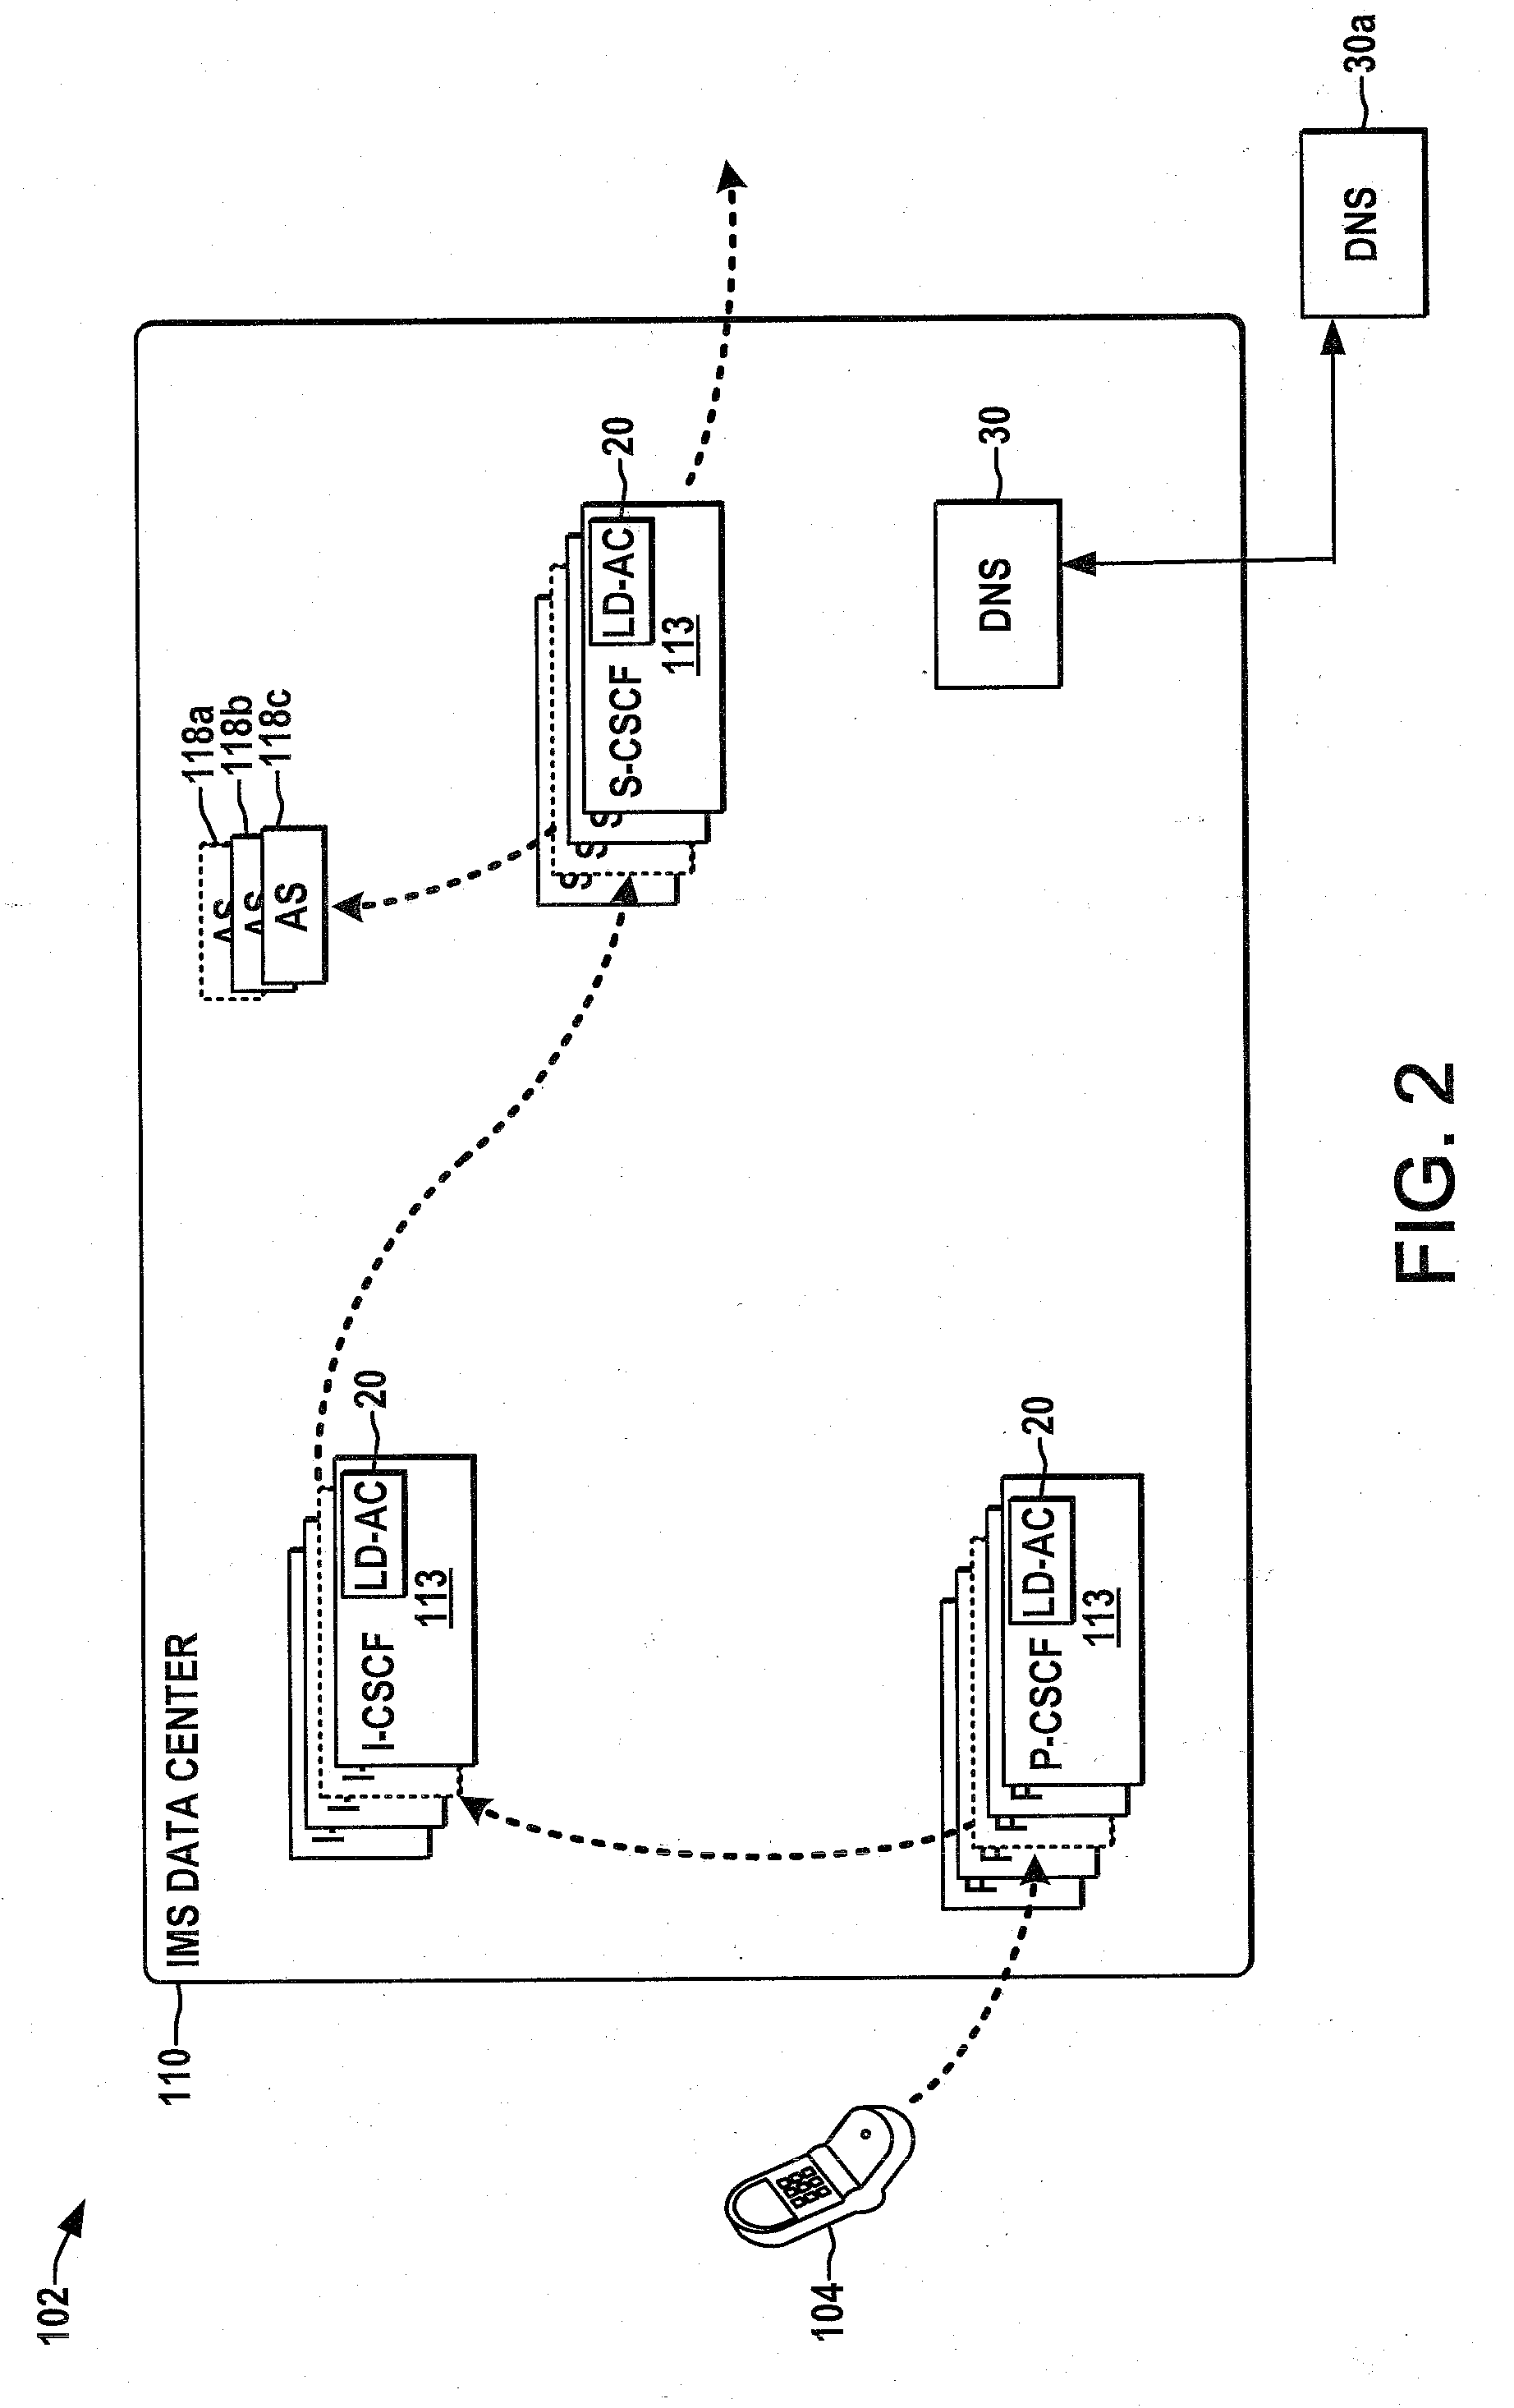 Systems and methods for resolving resource names to IP addresses with load distribution and admission control